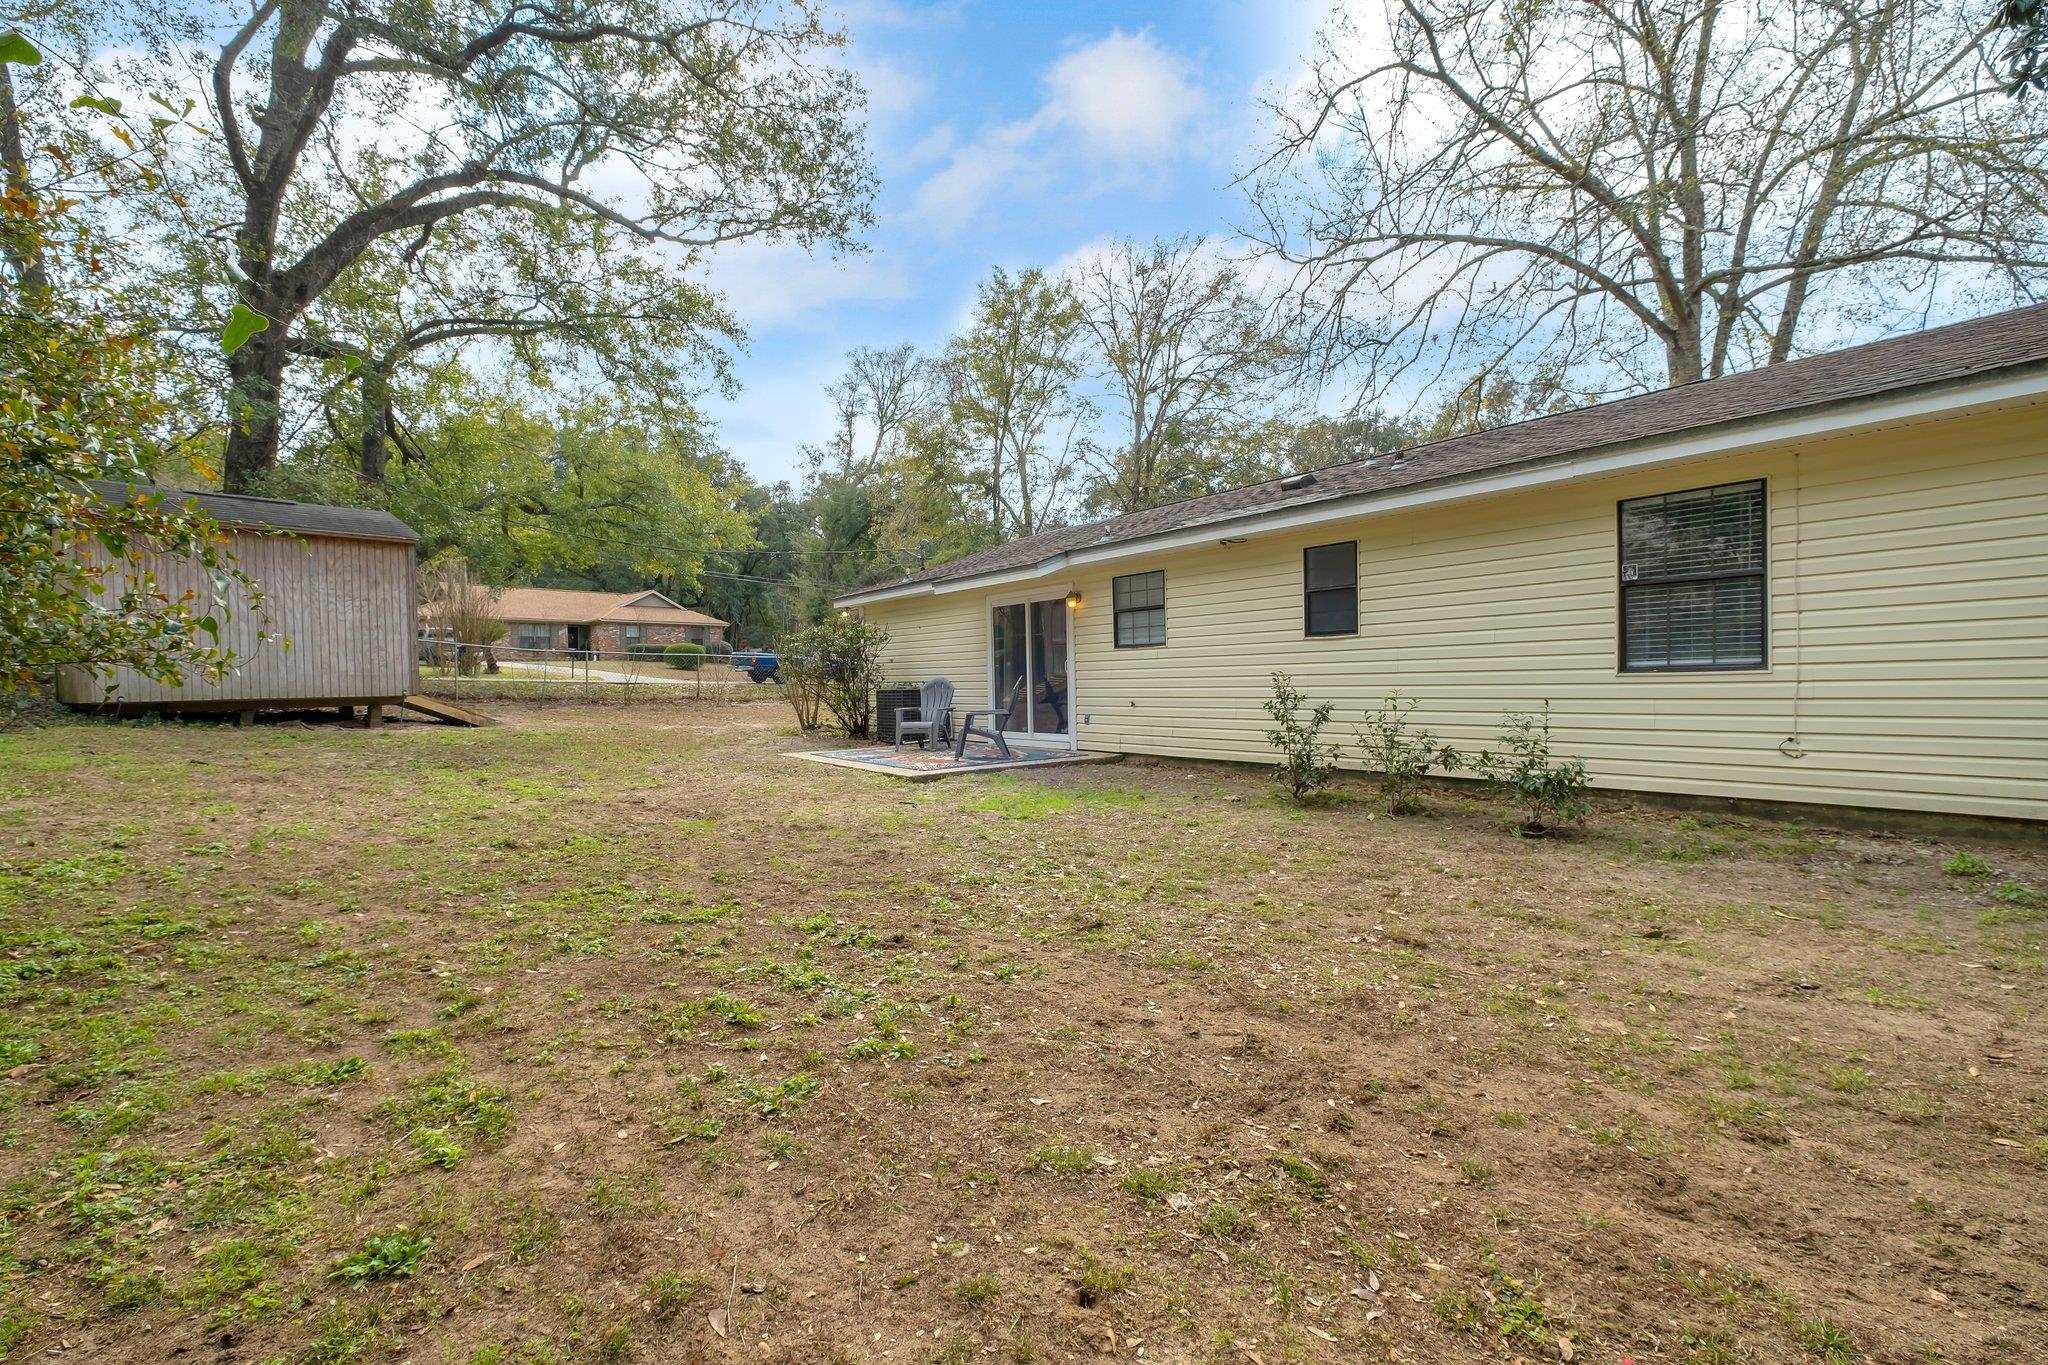 3720 Wood Hill Drive,TALLAHASSEE,Florida 32303,3 Bedrooms Bedrooms,2 BathroomsBathrooms,Detached single family,3720 Wood Hill Drive,367524